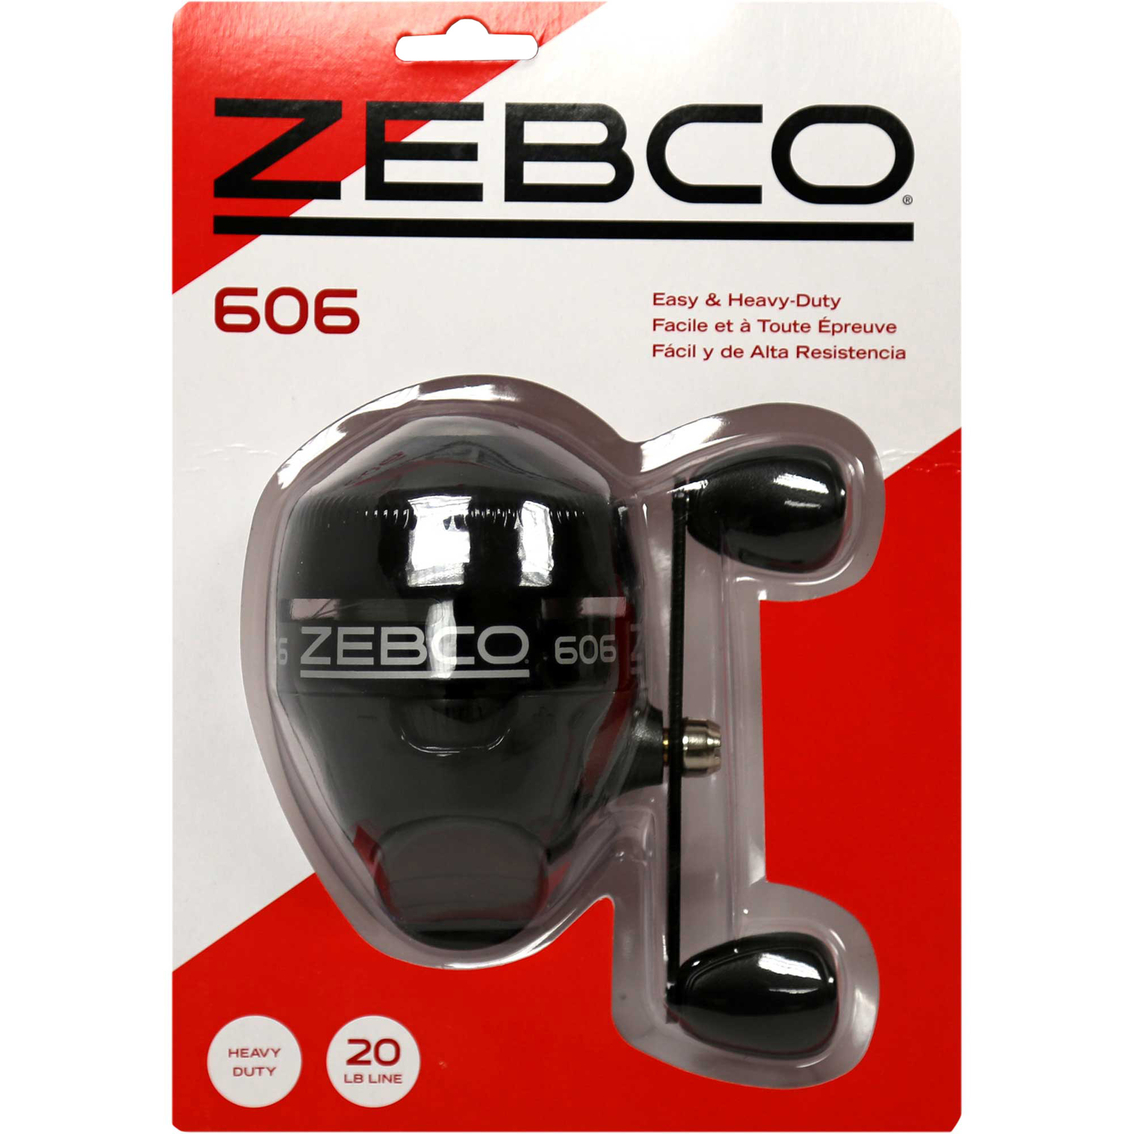 Zebco 606 Spin Cast Reel with 20 lb. Line - Image 5 of 5